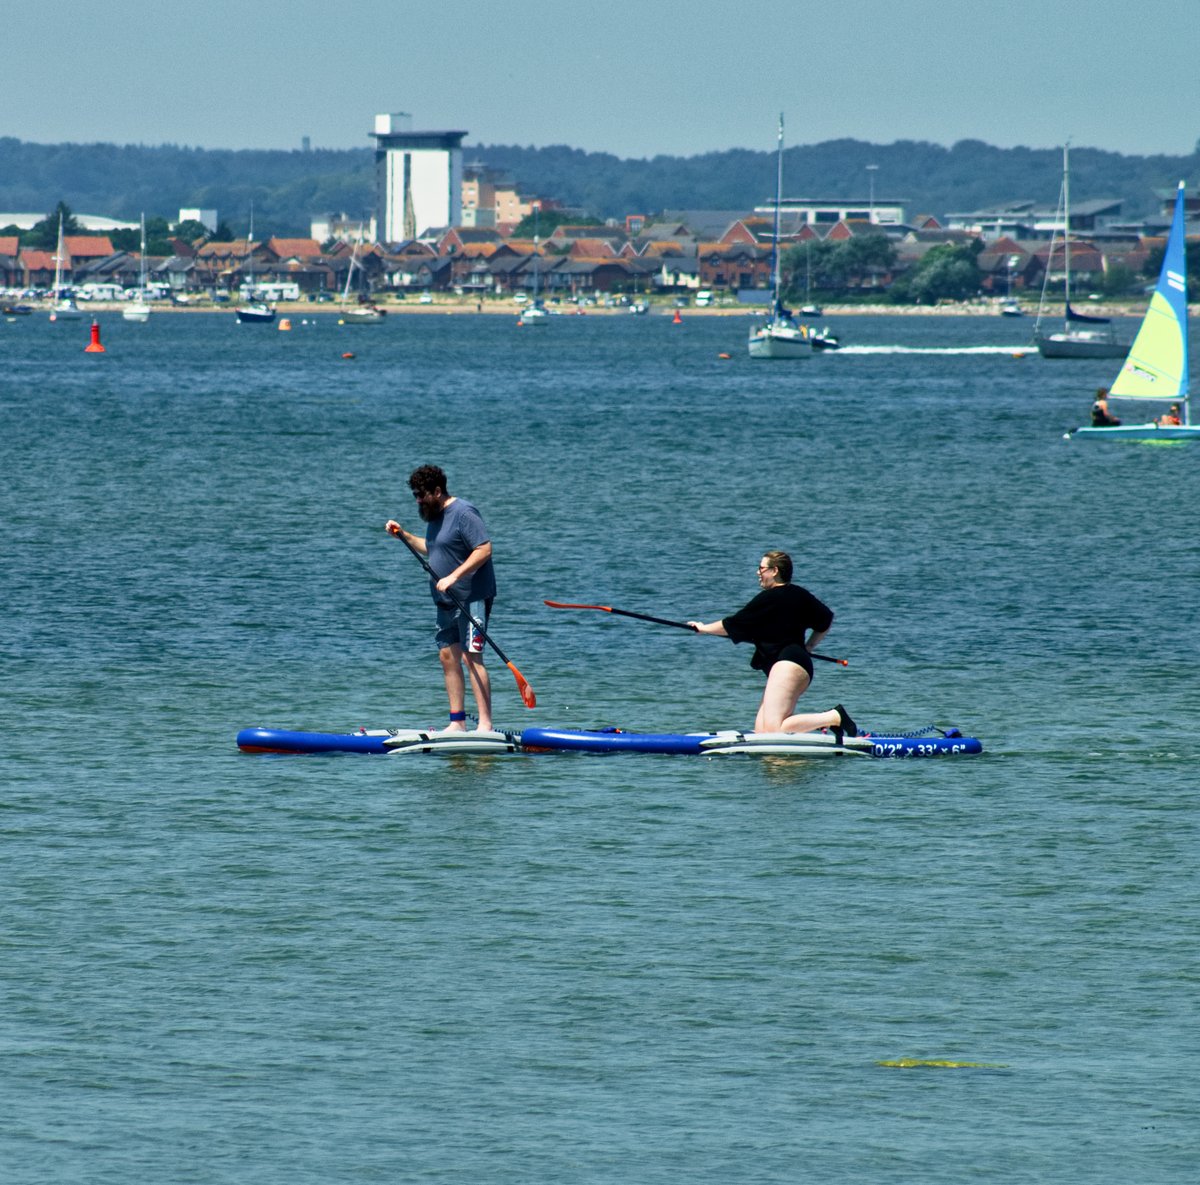 “Believe me my young friend, there is nothing – absolutely nothing – half so much worth doing as simply messing about on the water.” Love and peace, From #SandbanksBeach #sandbanks #sandbanksbeach #beachlife #summerfun #familyholidays #funinthesun #visitsandbanks #visitdorset